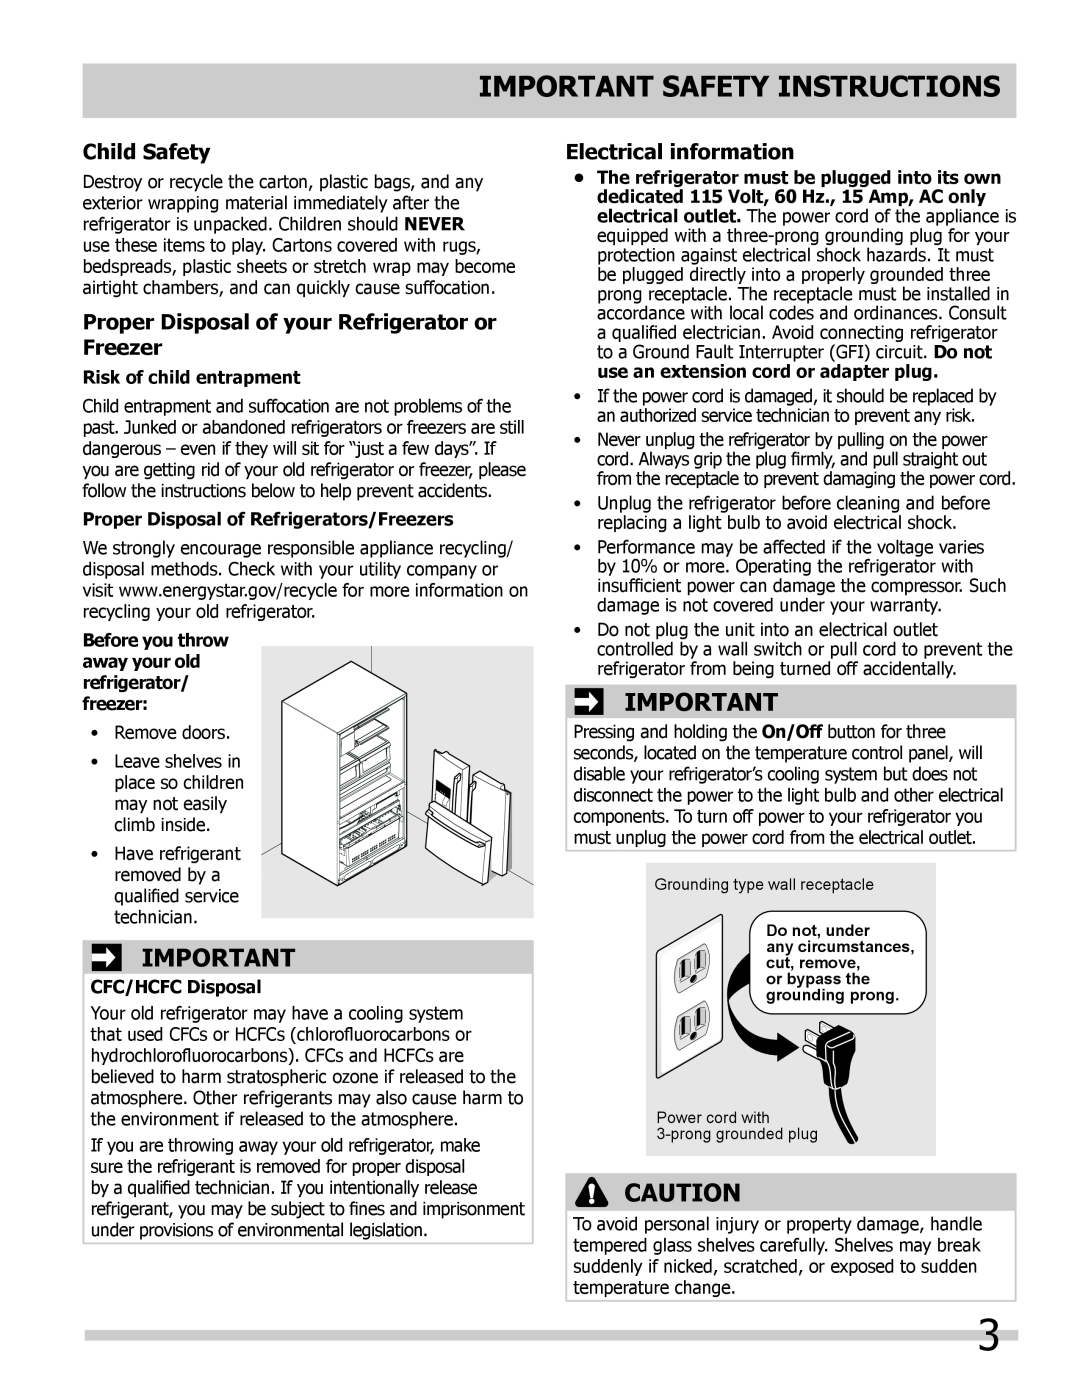 Frigidaire FGHB2866PF, FGHF2366PF Child Safety, Proper Disposal of your Refrigerator or Freezer, Electrical information 